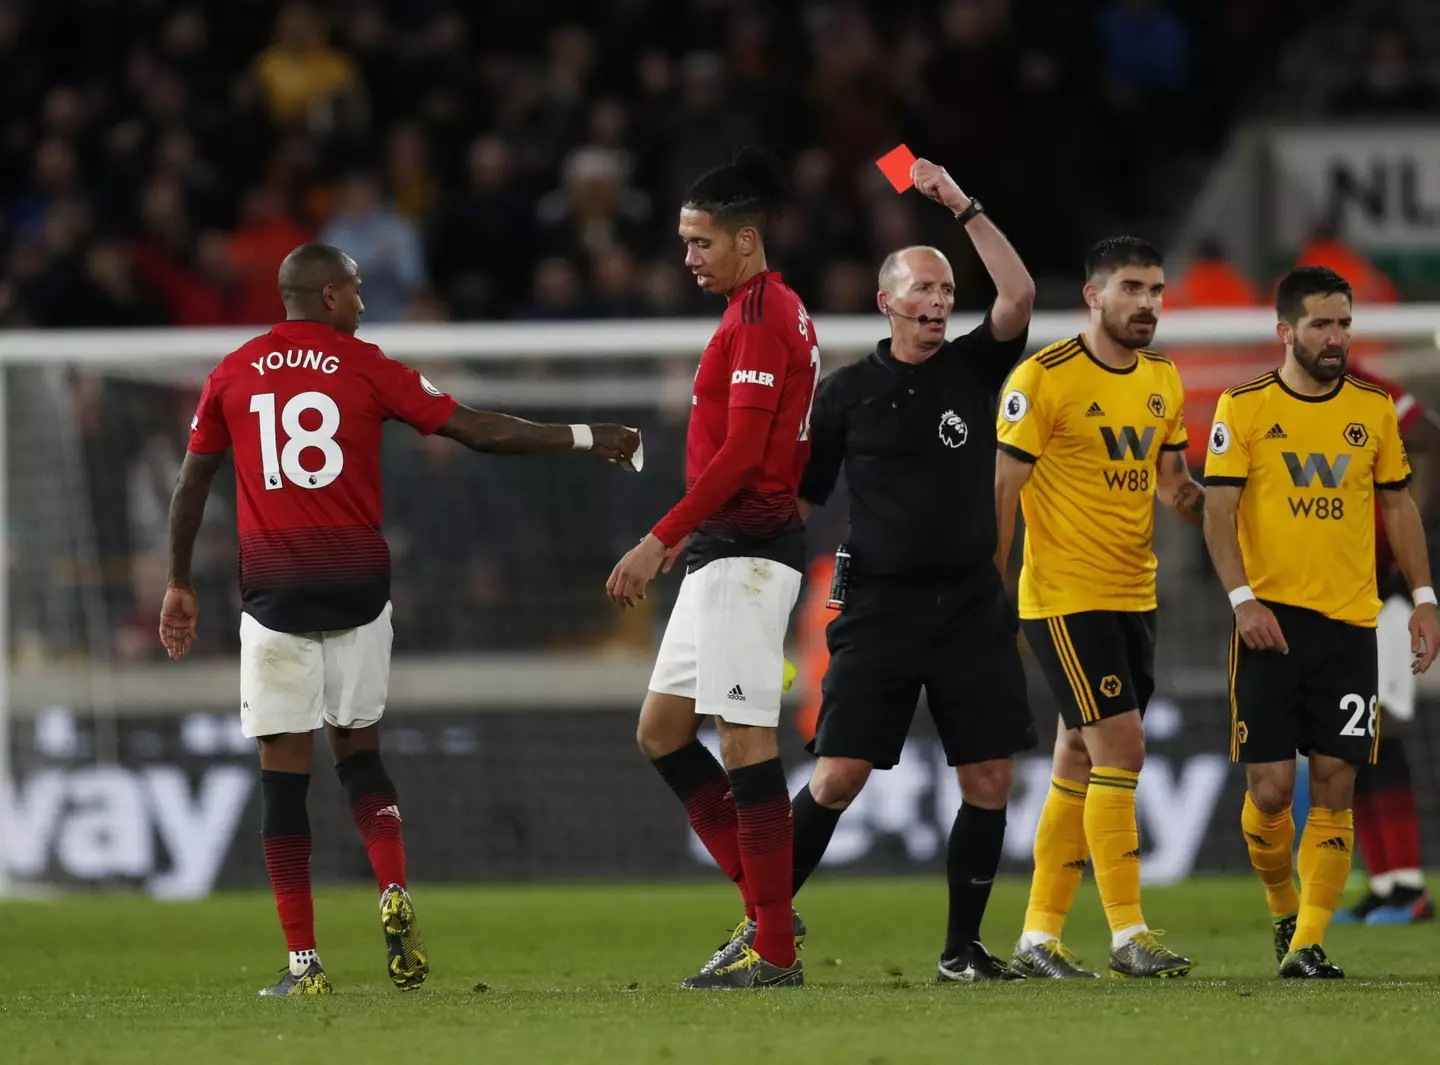 Dean brandishes his 100th Premier League red card. Image: PA Images